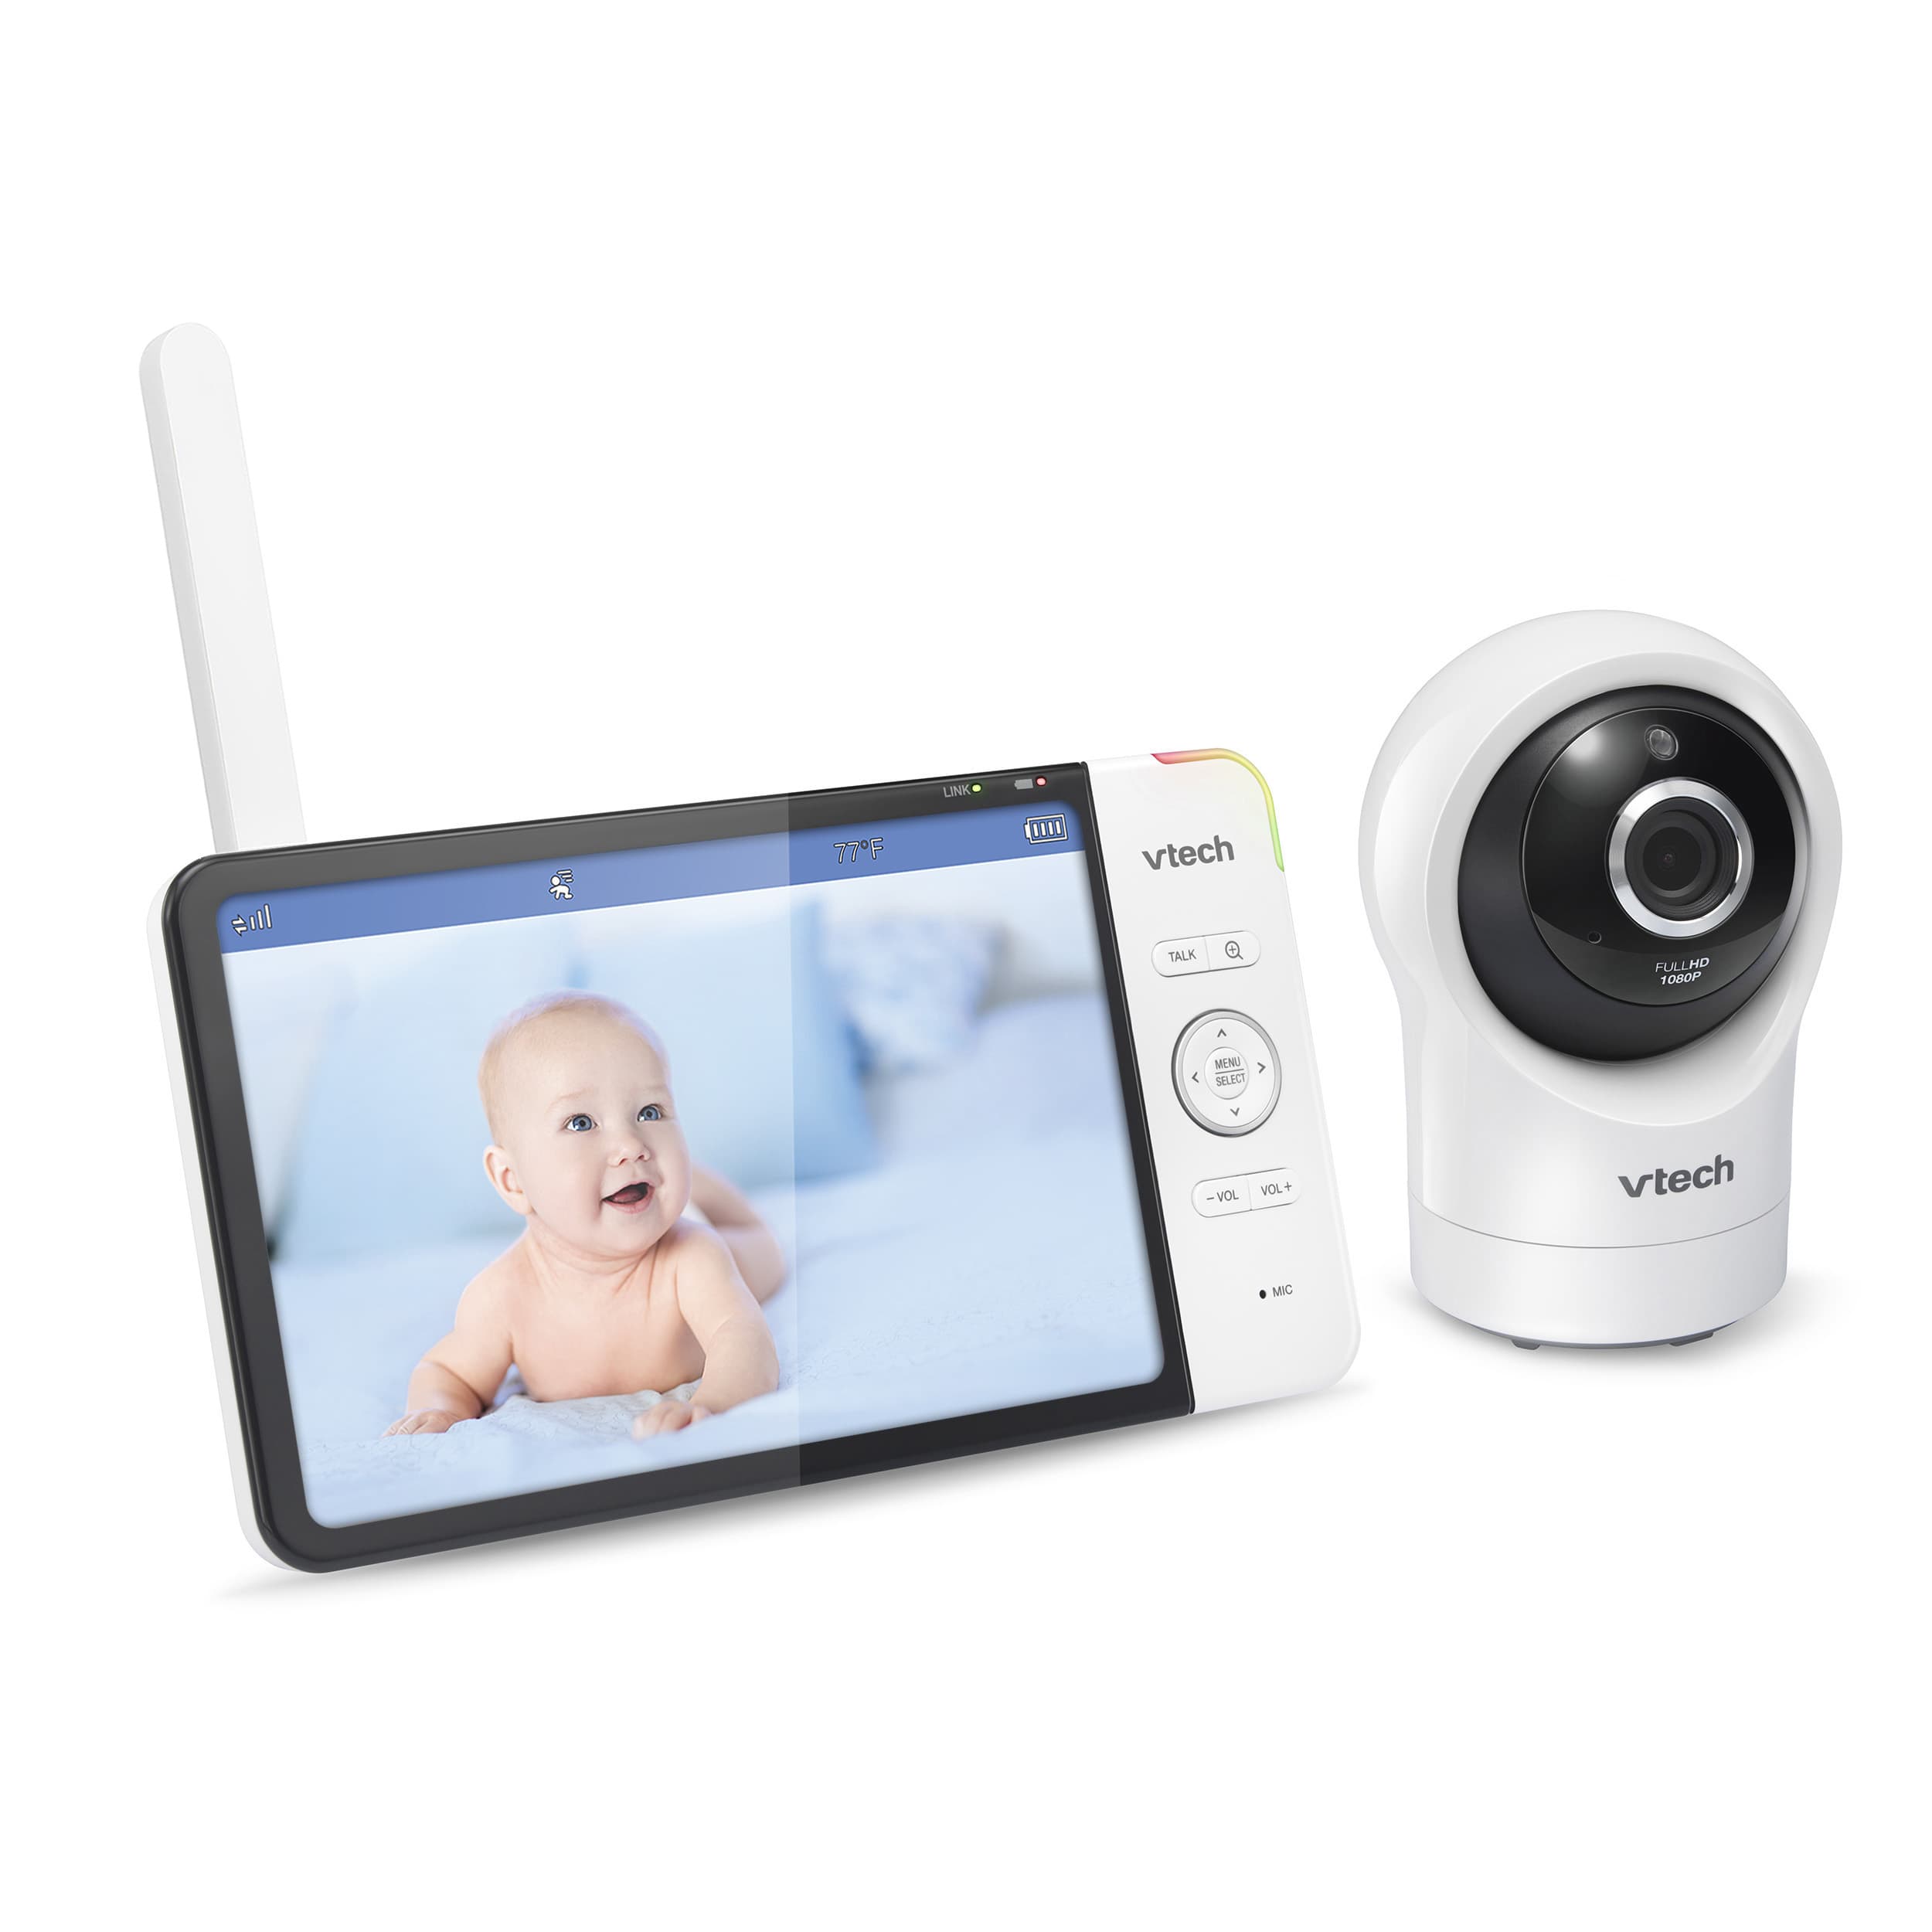 VTech VM343 REPLACEMENT Parent Video Handheld Baby CAMERA 3 DAYS SALE!! 